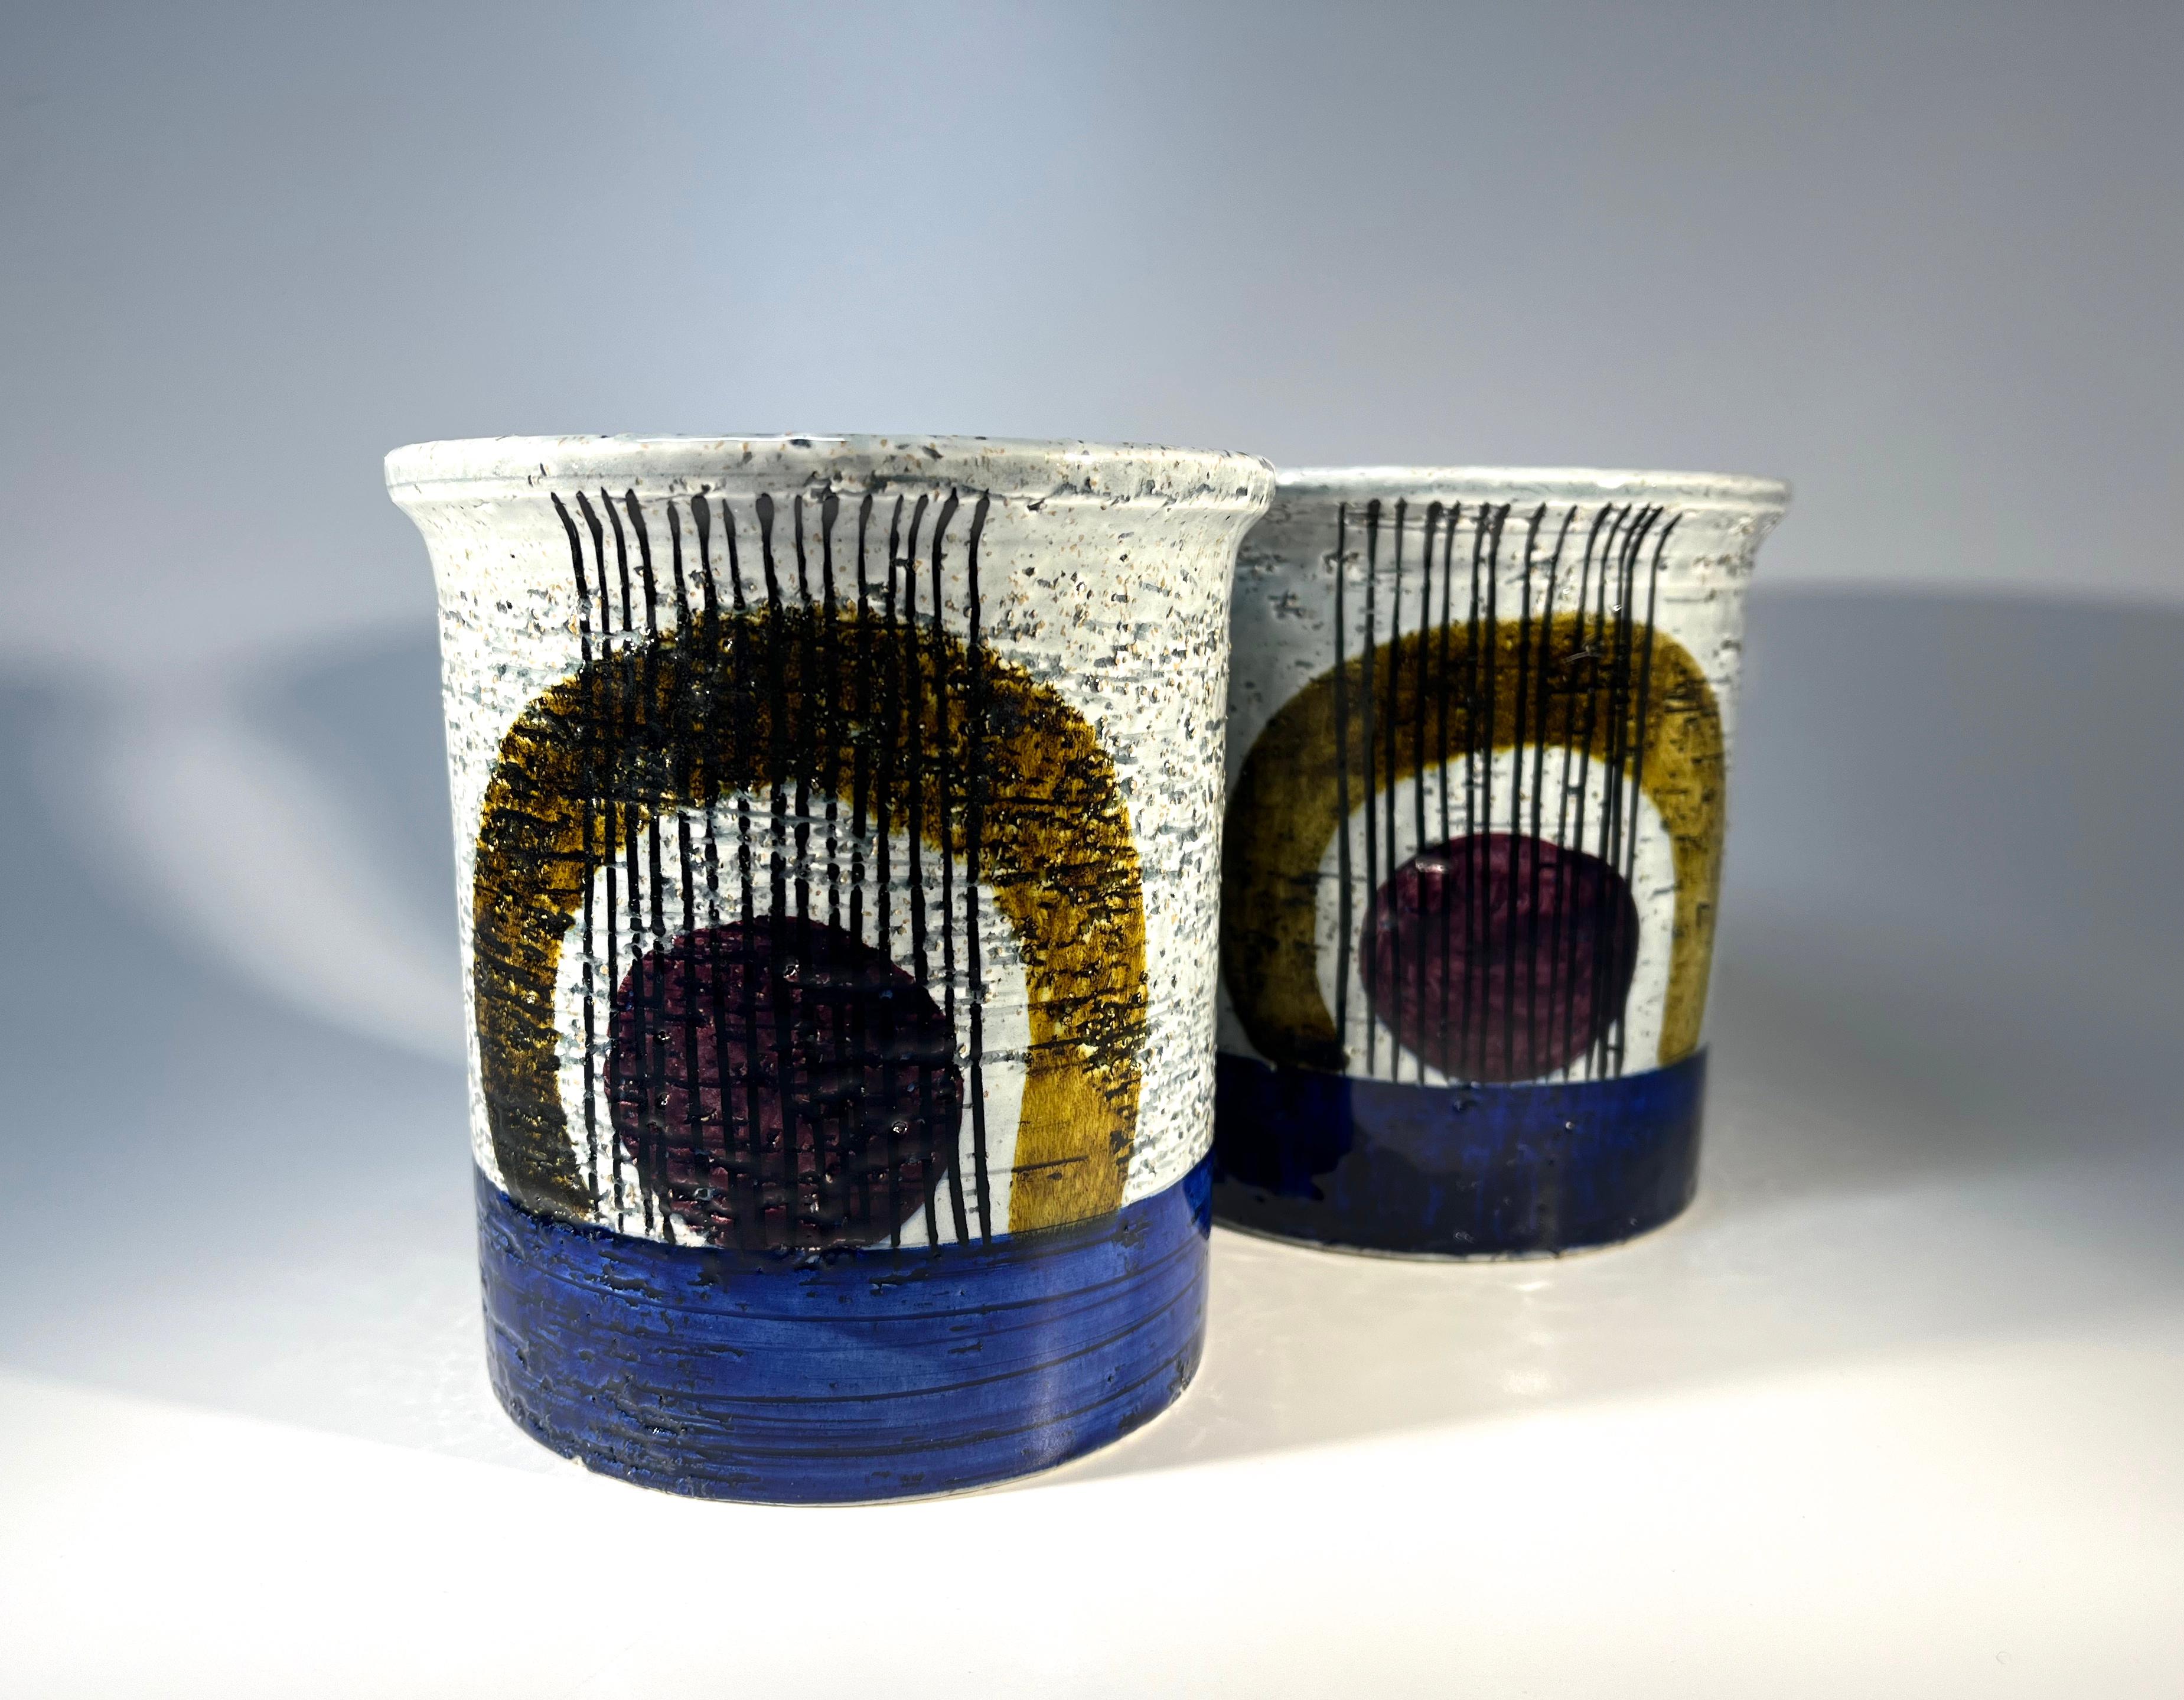 Distinctive 'Kurbit' series pair of vases by Olle Alberius for Rörstrand, Sweden
Hand painted bold abstract decoration on pale grey glaze
Stamped 'R' Sweden, Kurbits OA 5 on bases
Height 5 inch, Dia 4.5 inch
Circa 1960's
In excellent condition.